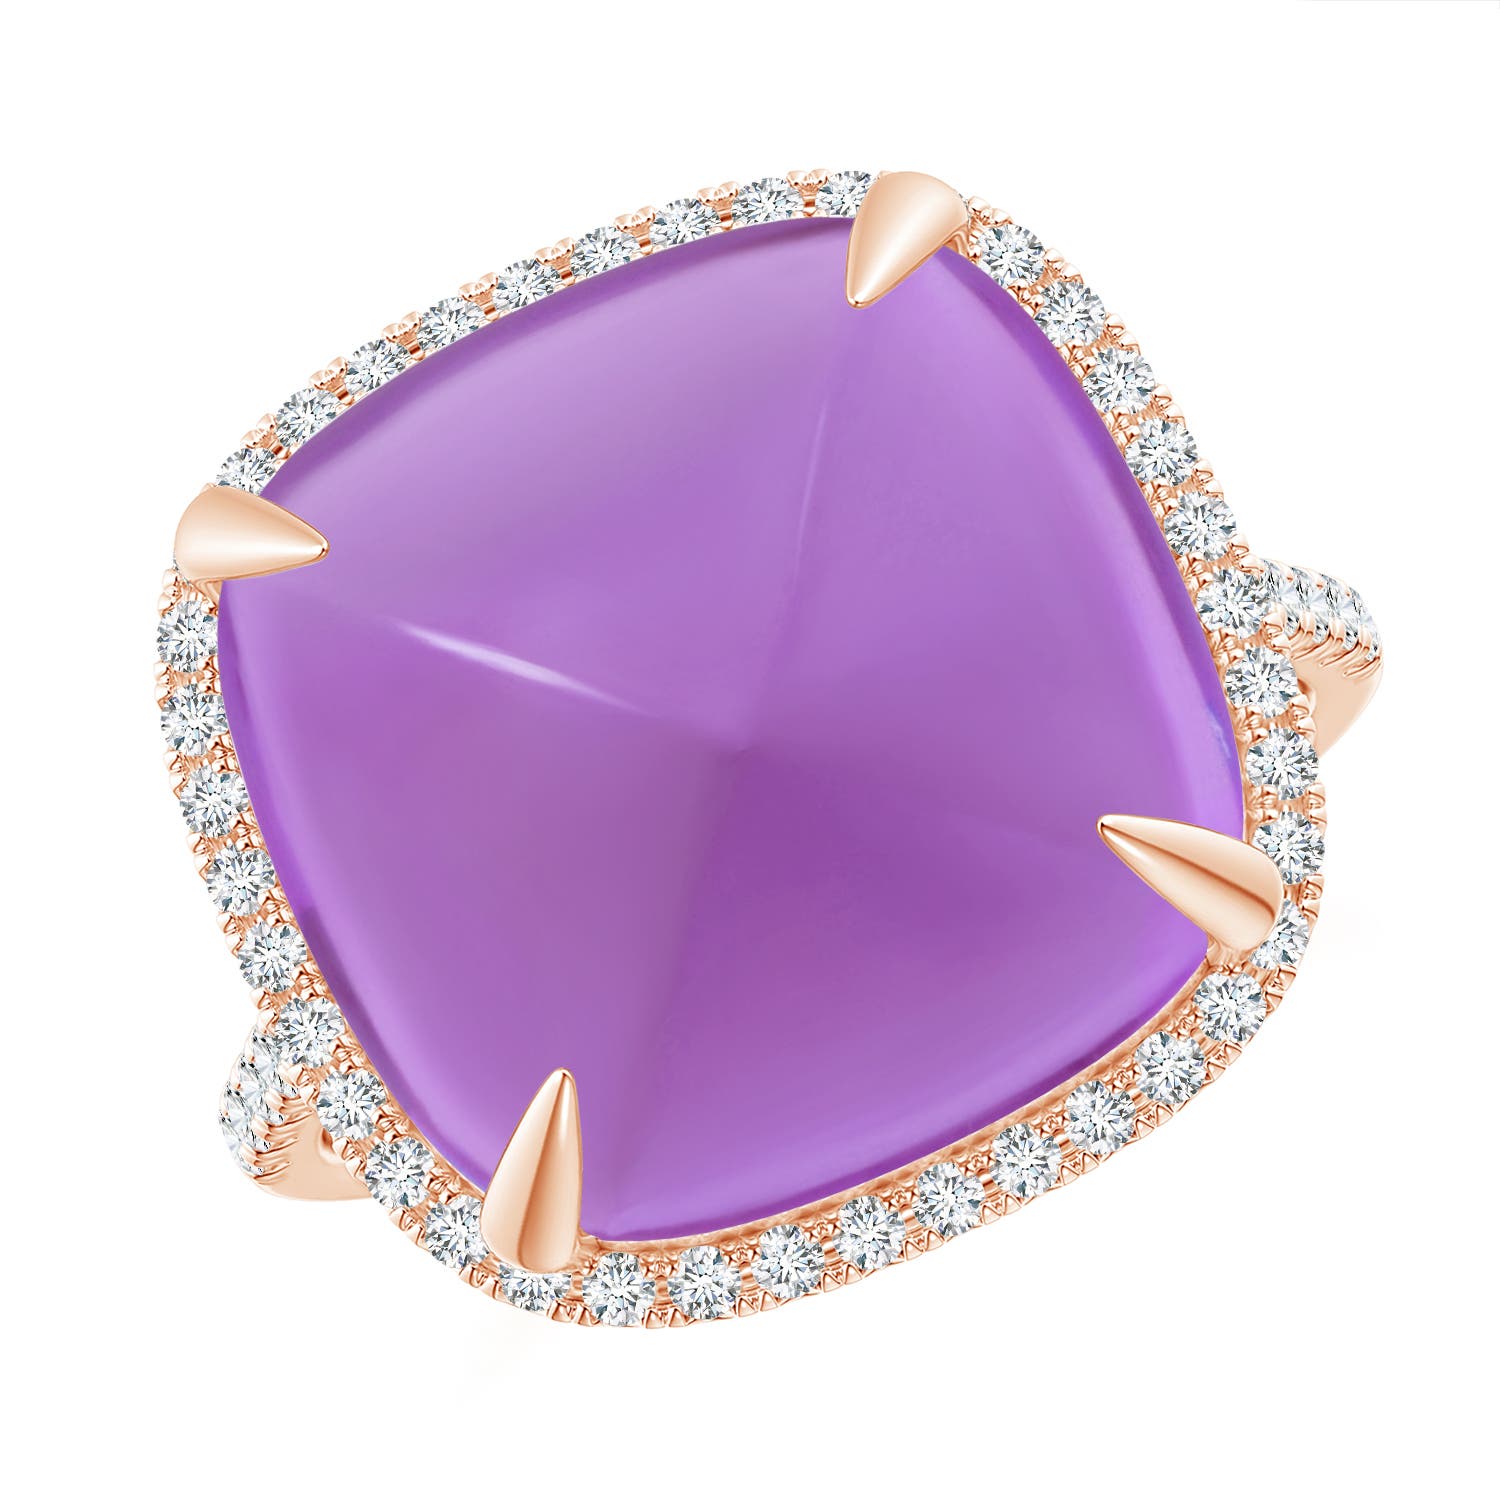 AA - Amethyst / 12.91 CT / 14 KT Rose Gold